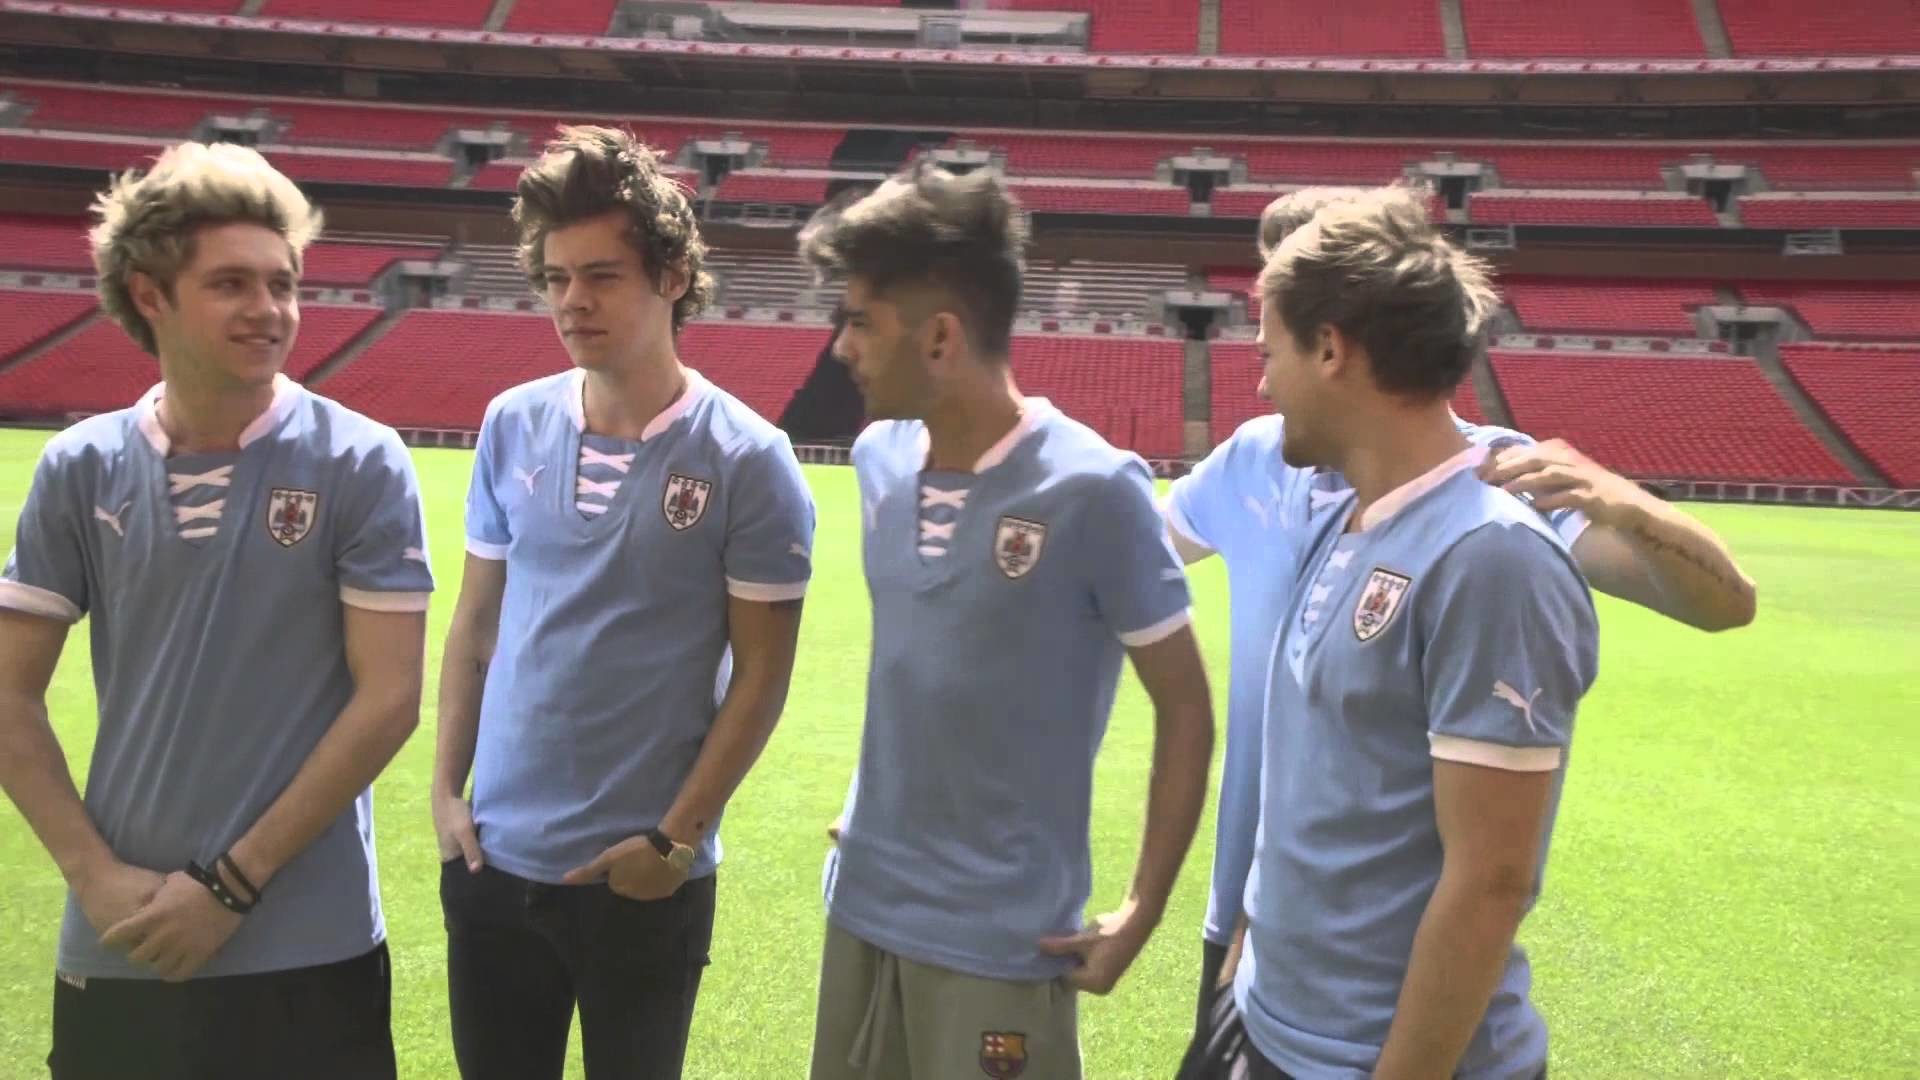 1920x1080 One Direction taking their shirts off and playing football? Oh go on... -  YouTube